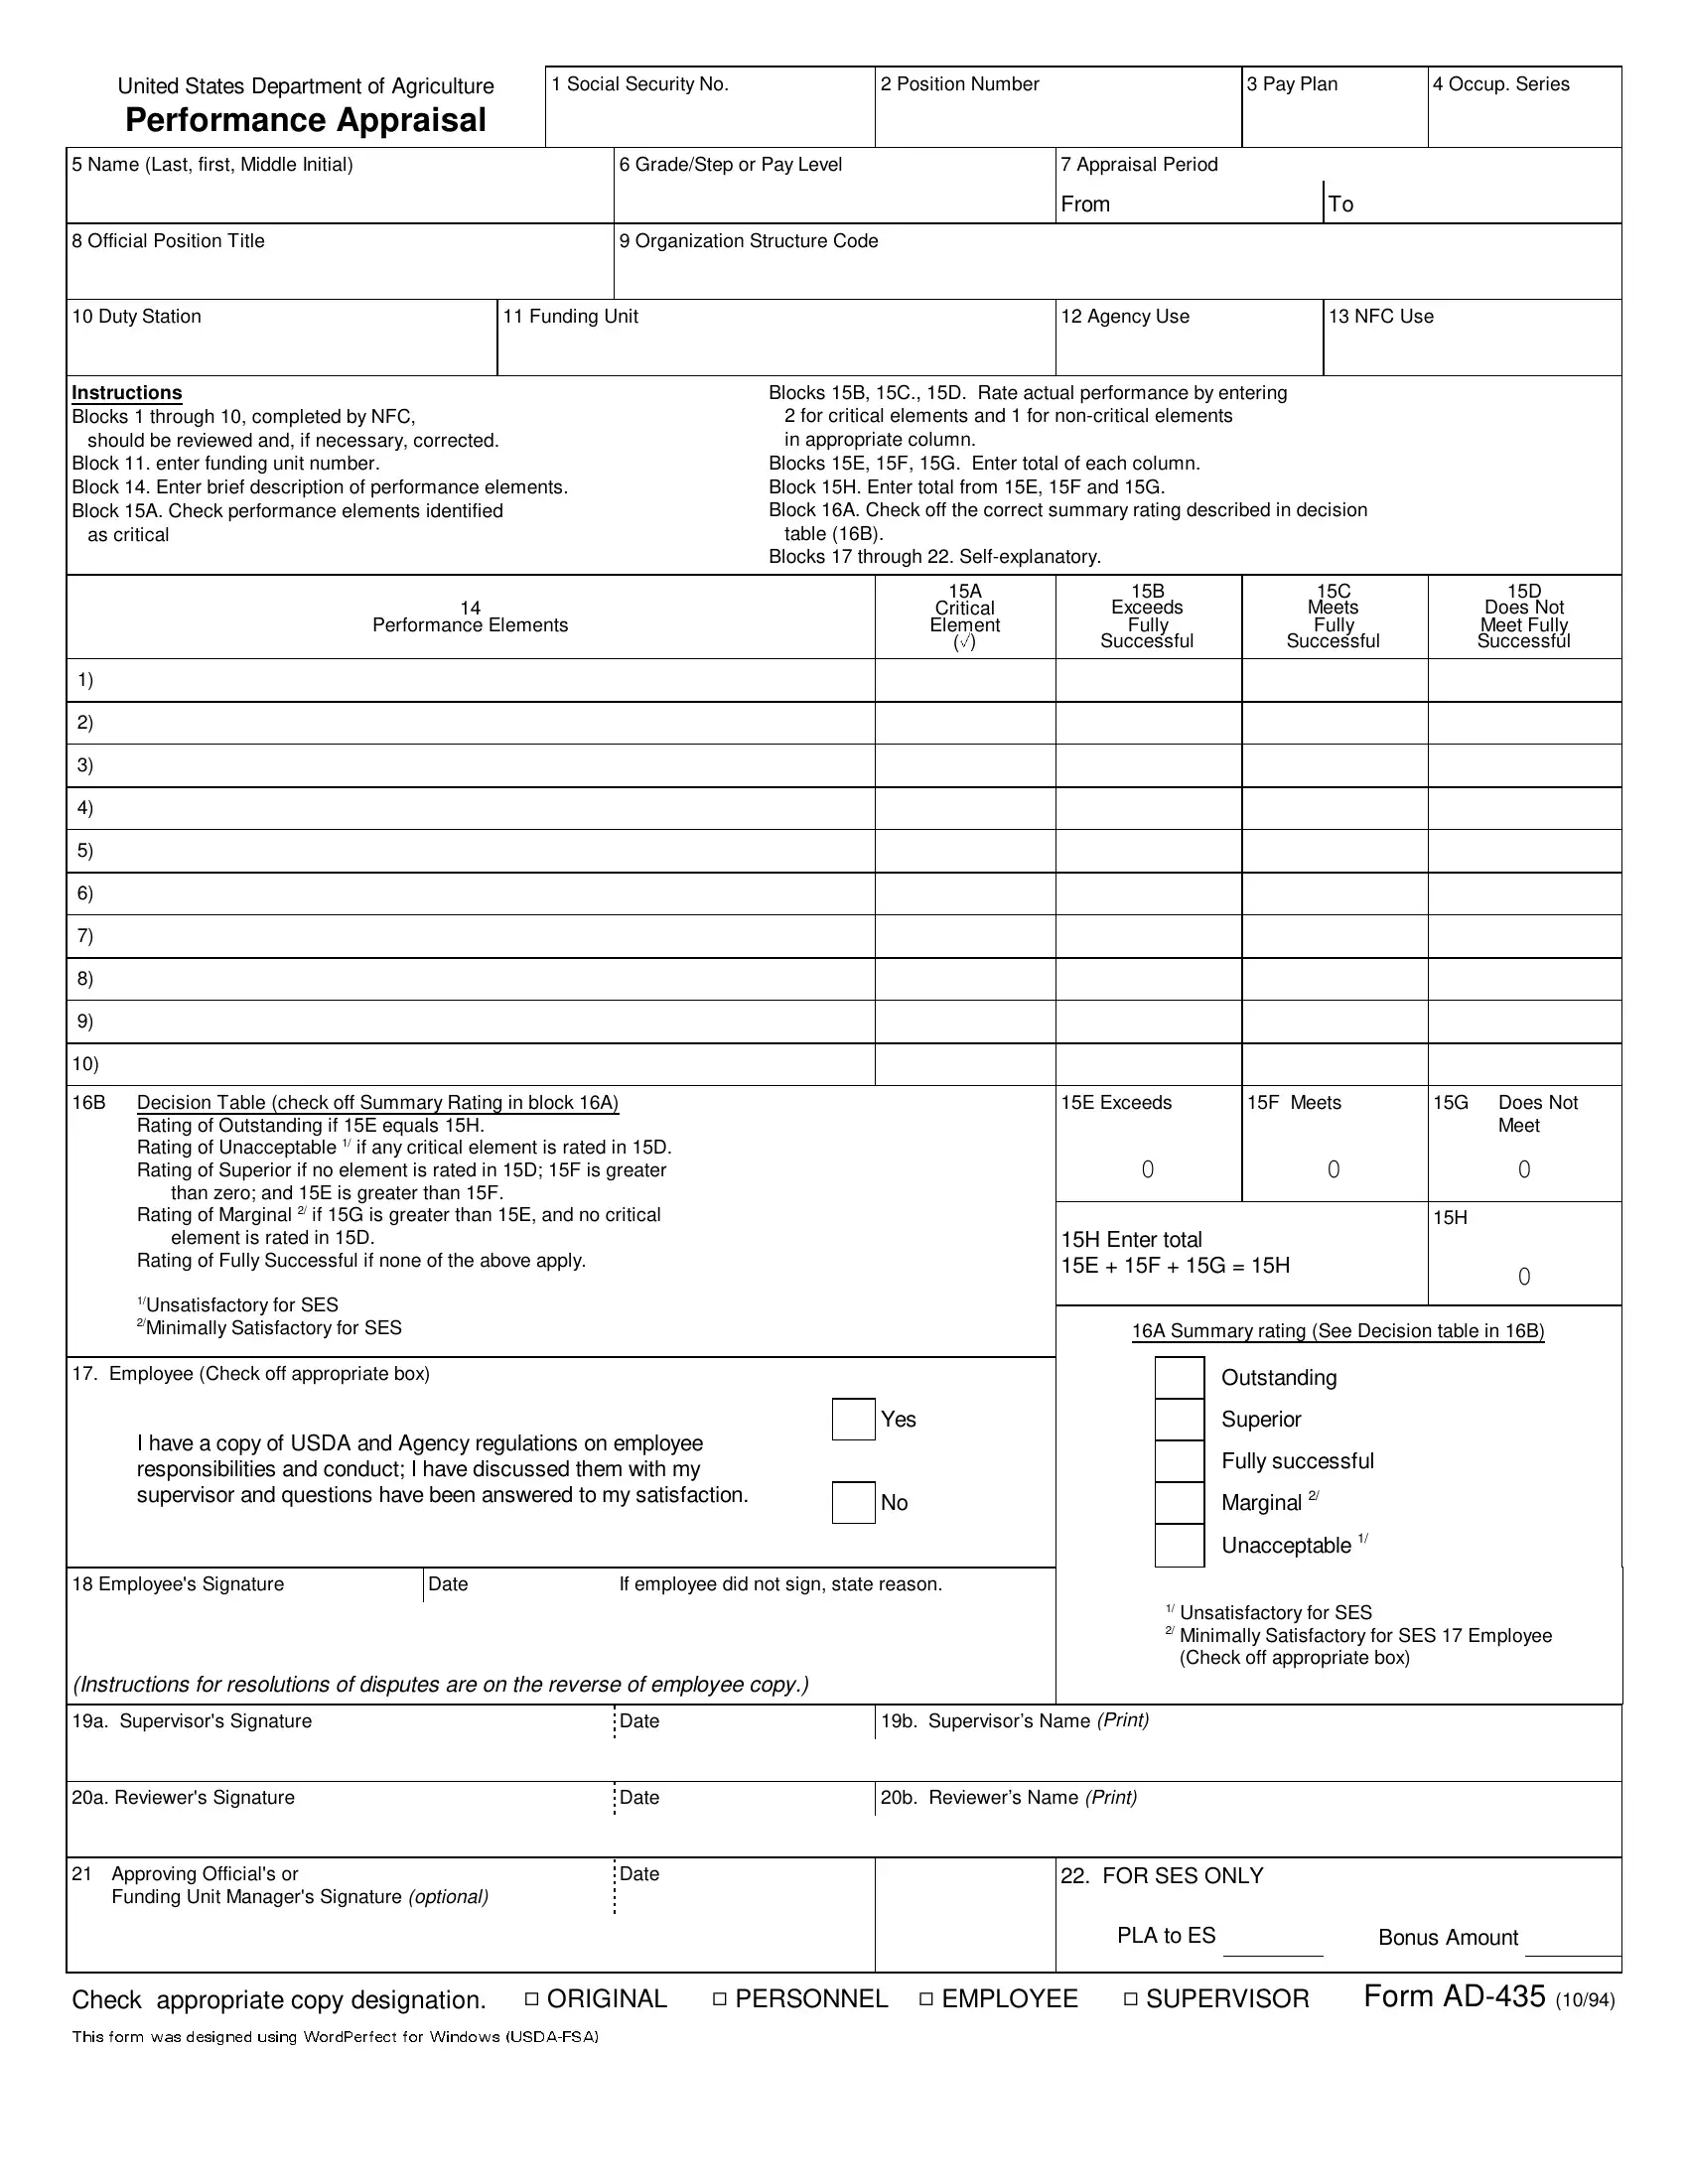 Ad435 Form Preview